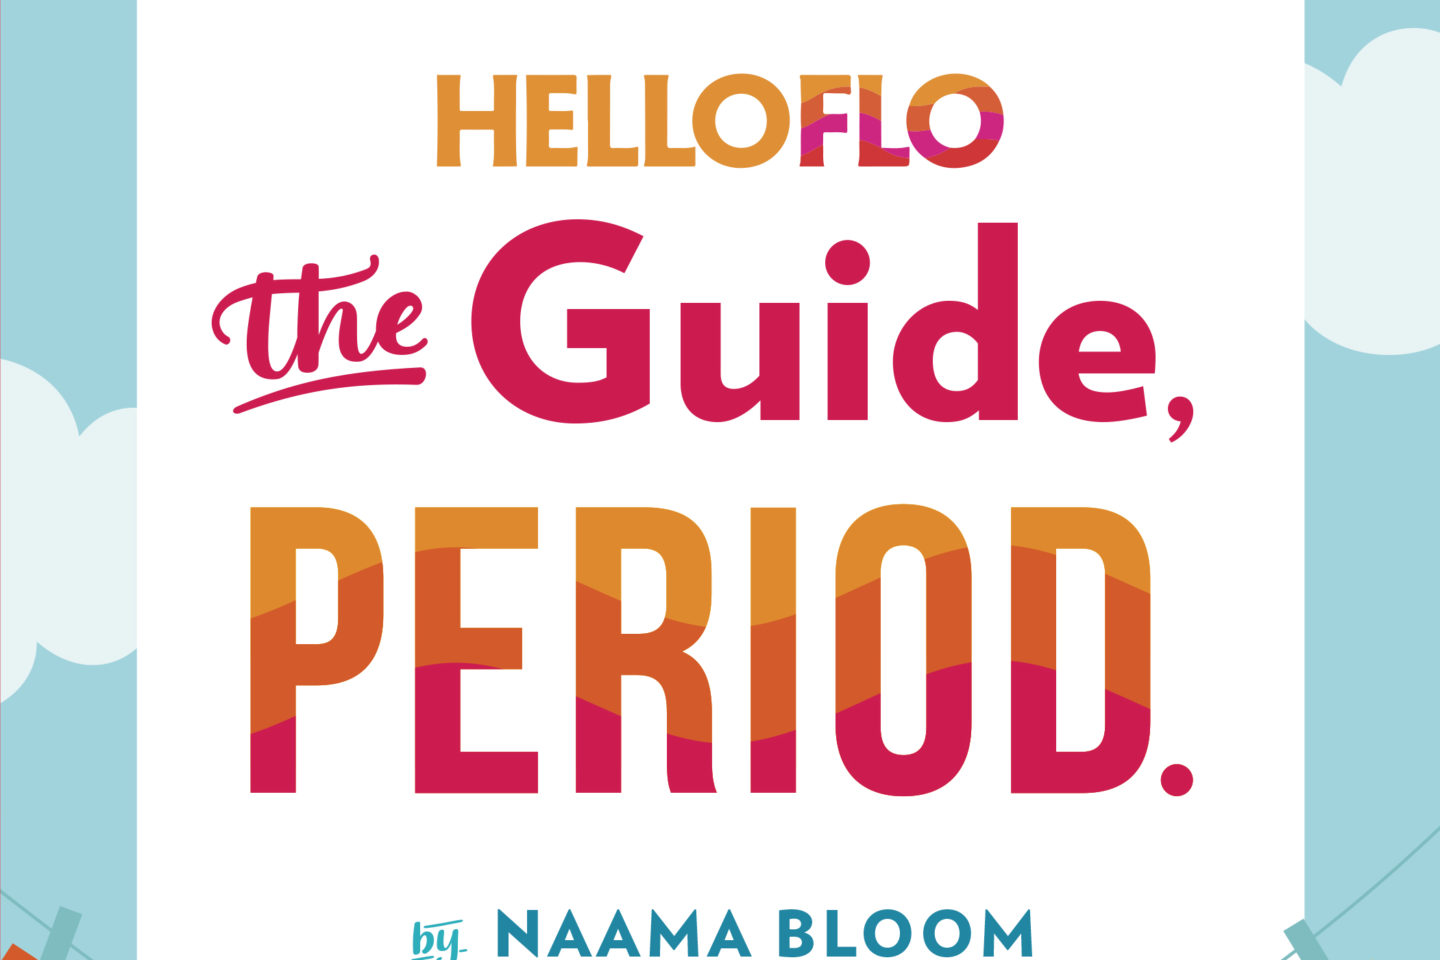 The HelloFlo Book Reveal Is Here! See The Cover, Plus A Q & A With Founder, Naama Bloom